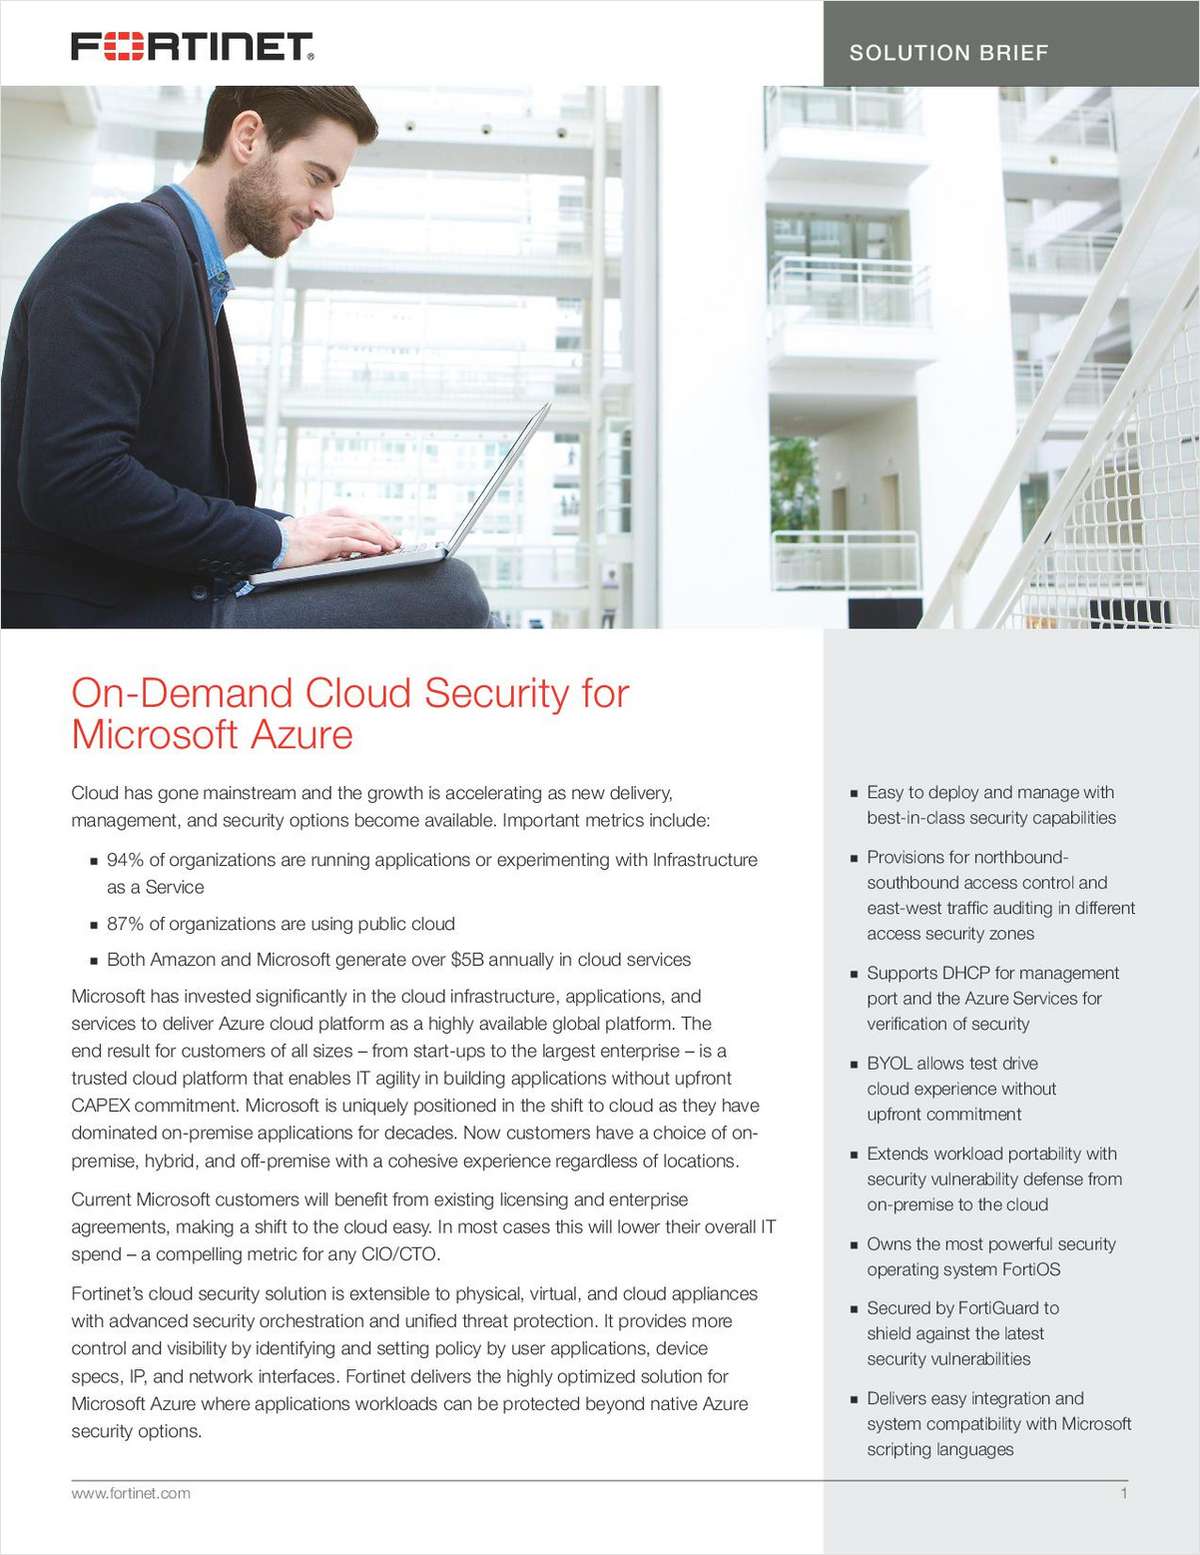 On-Demand Cloud Security for Microsoft Azure